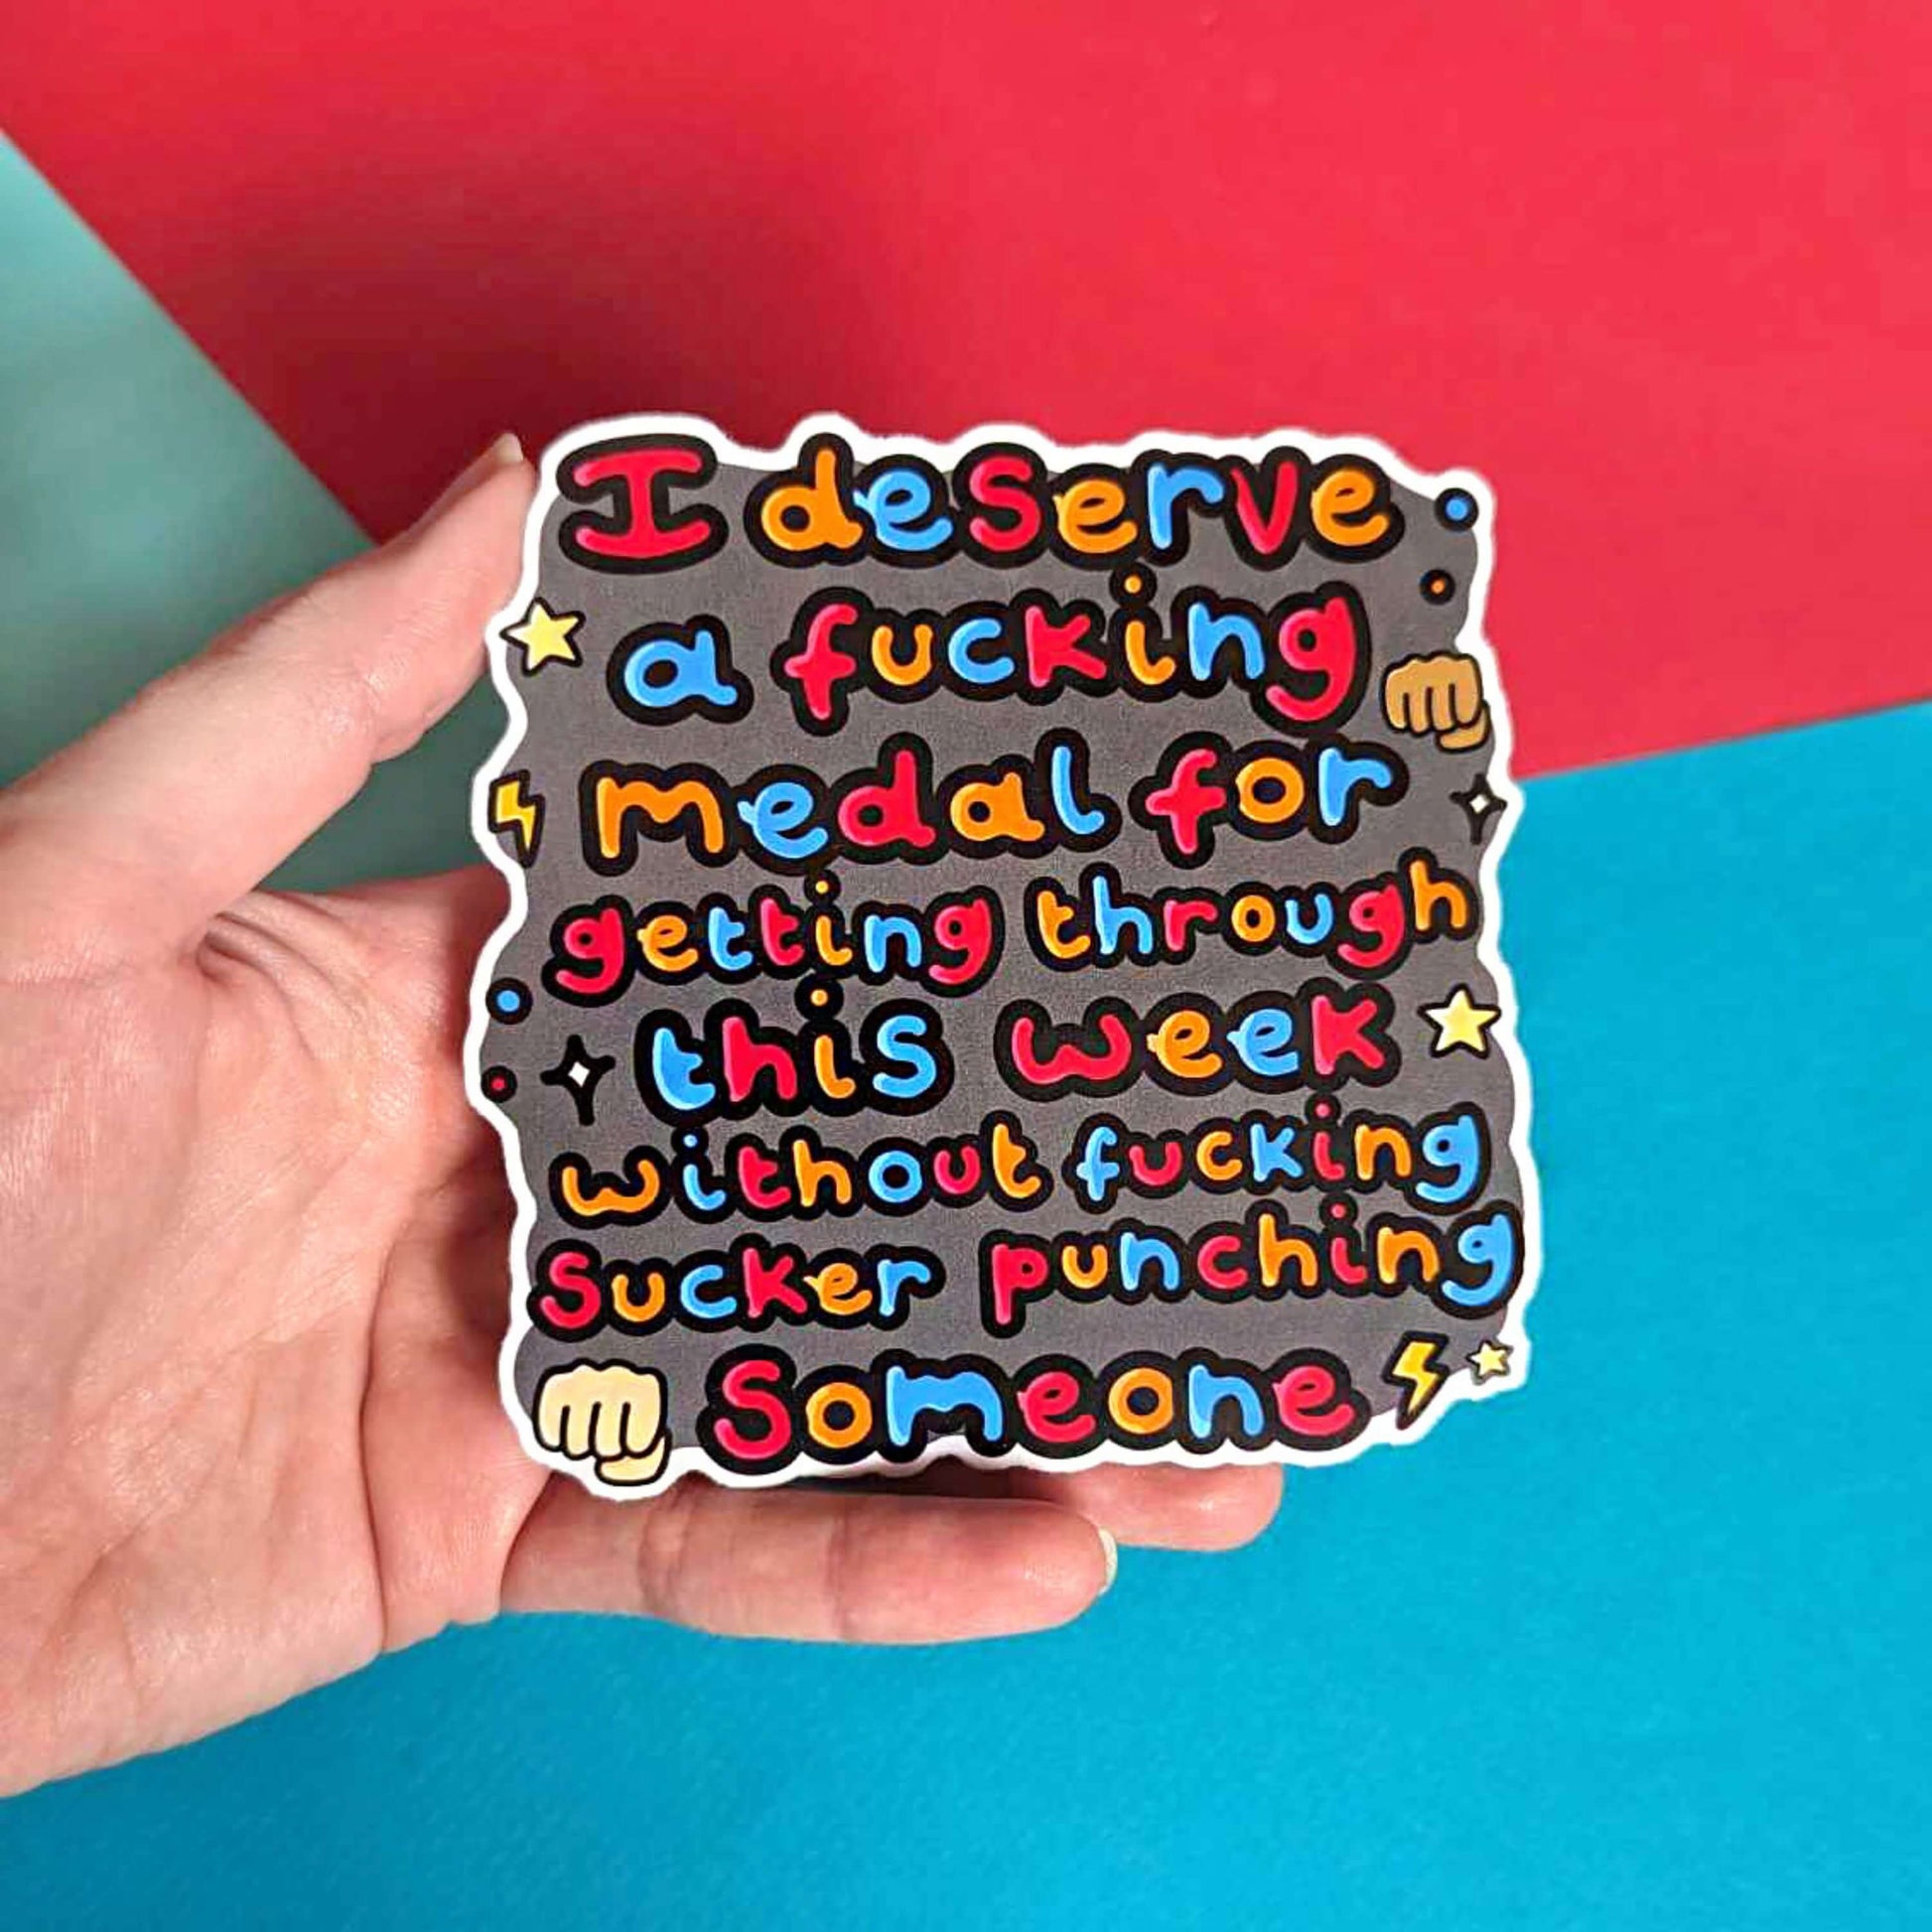 I Deserve A Medal Sticker of the words I deserve a fucking medal for getting through this week without fucking sucker punching someone' in bubble text with hand, lightning bolts, sparkles and star emojis. It is held in a hand in front of a red, blue and green background.